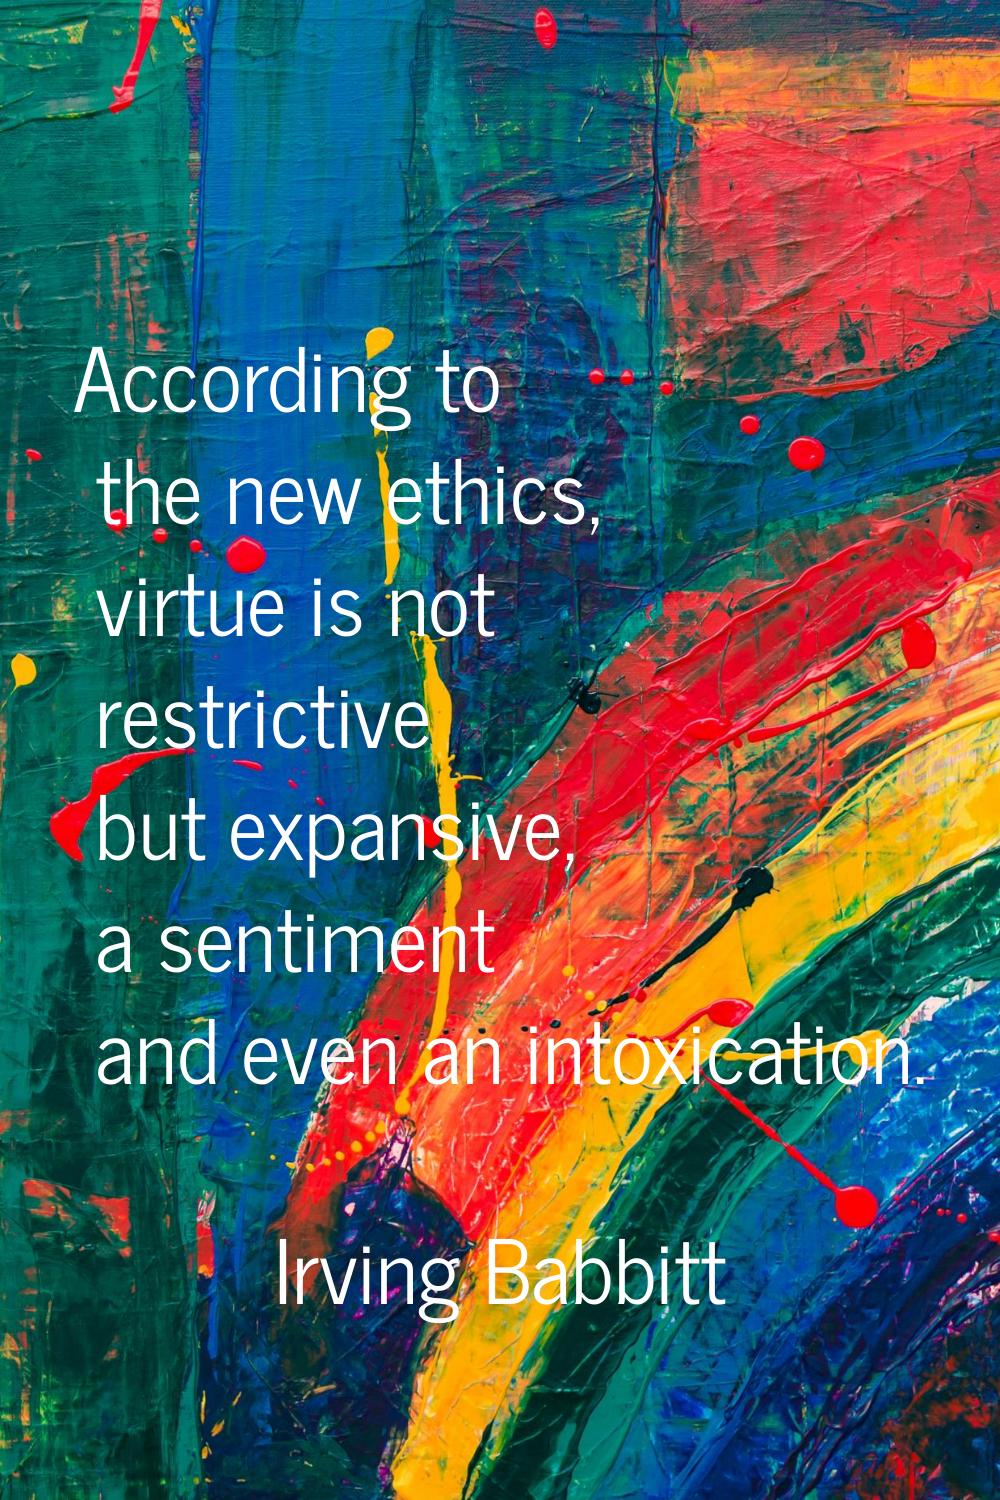 According to the new ethics, virtue is not restrictive but expansive, a sentiment and even an intox